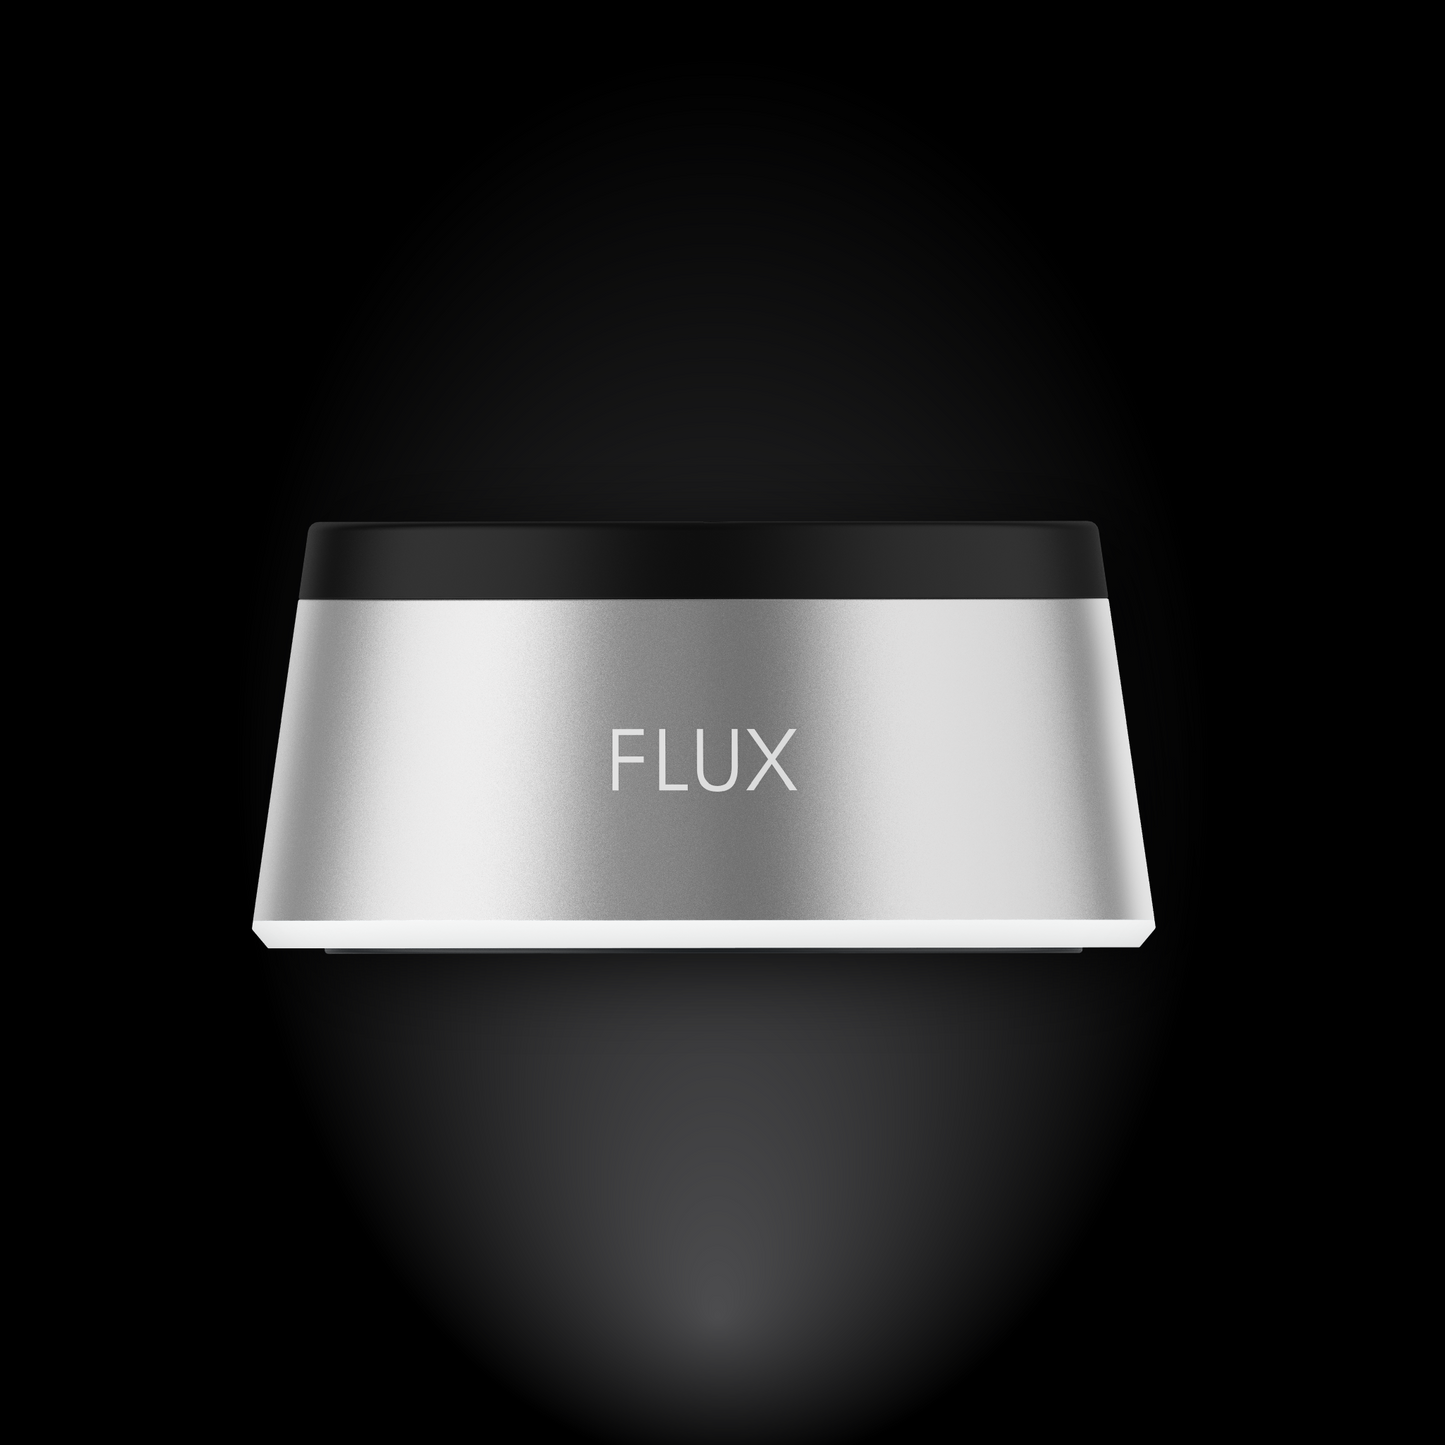 Silver Flux Wireless Charger and Battery Pack by Yocan Black sold by Yocan Black